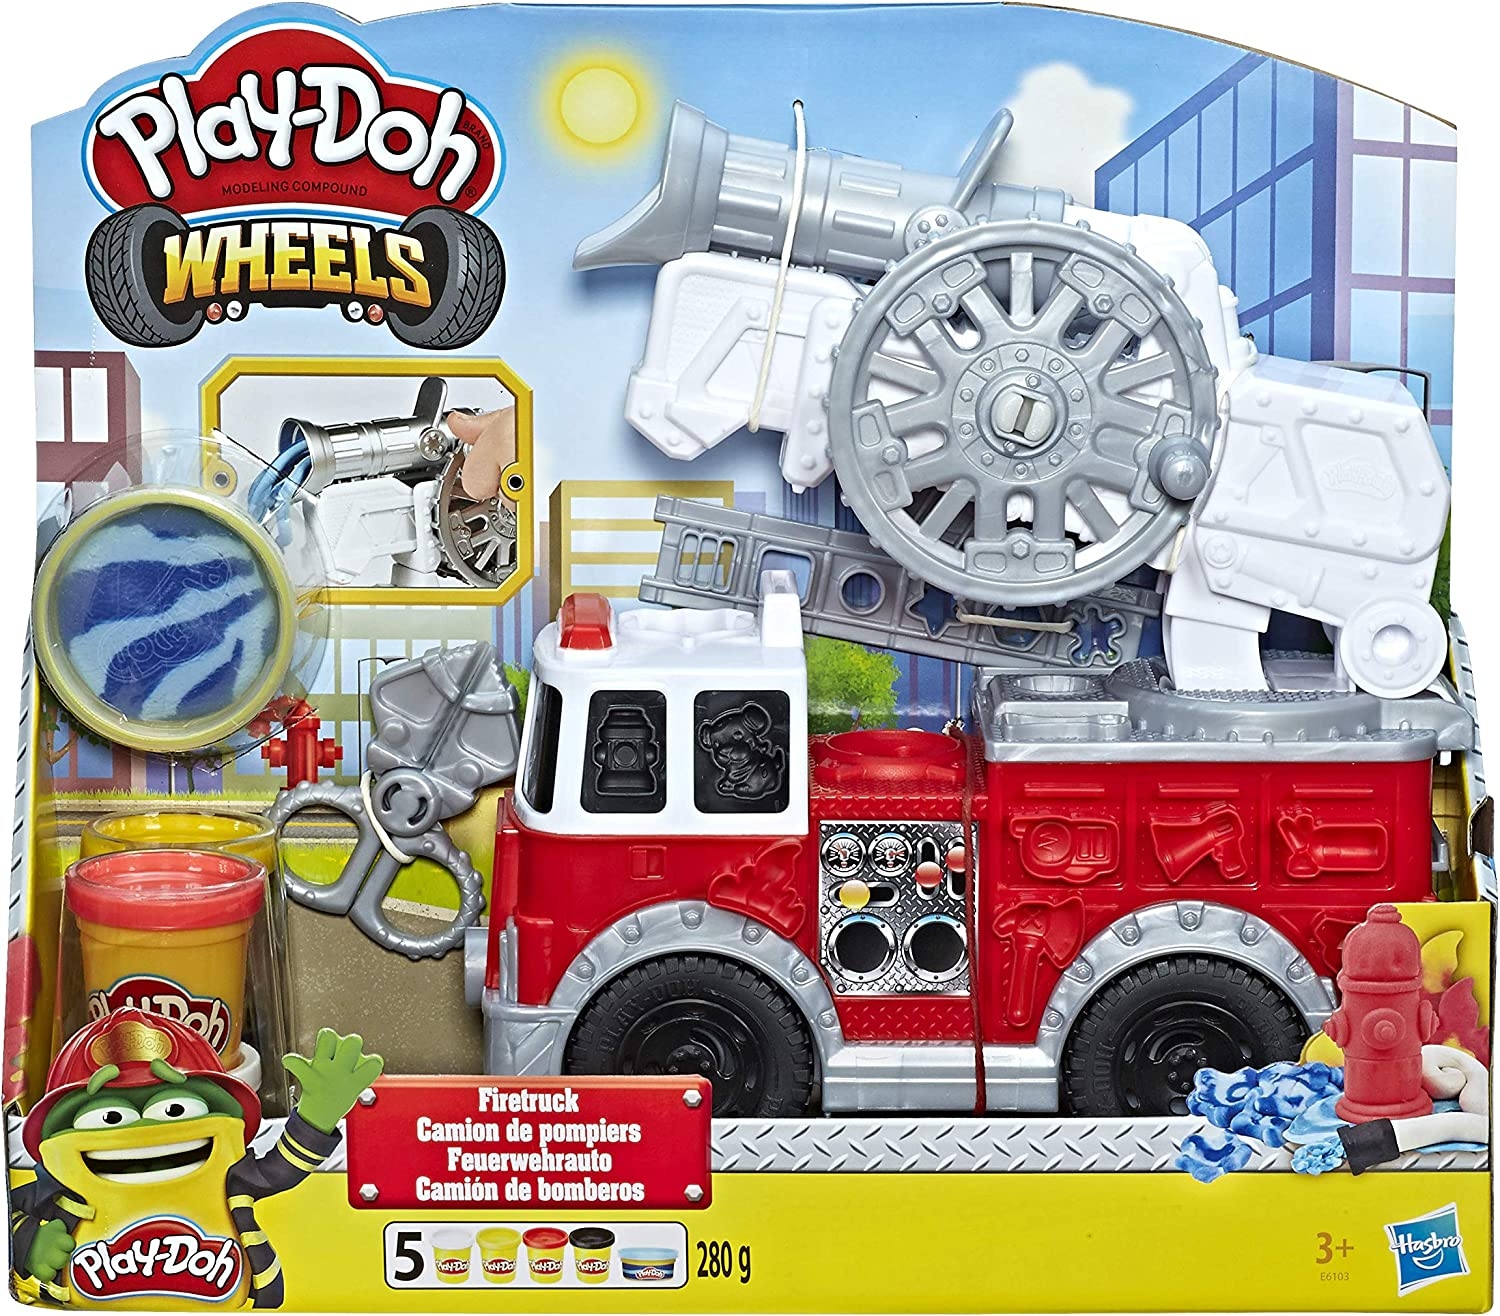 Play-Doh Wheels Firetruck Toy with 5 Non-Toxic Colors Including Play-Doh Water Compound (Amazon Exclusive) Import To Shop